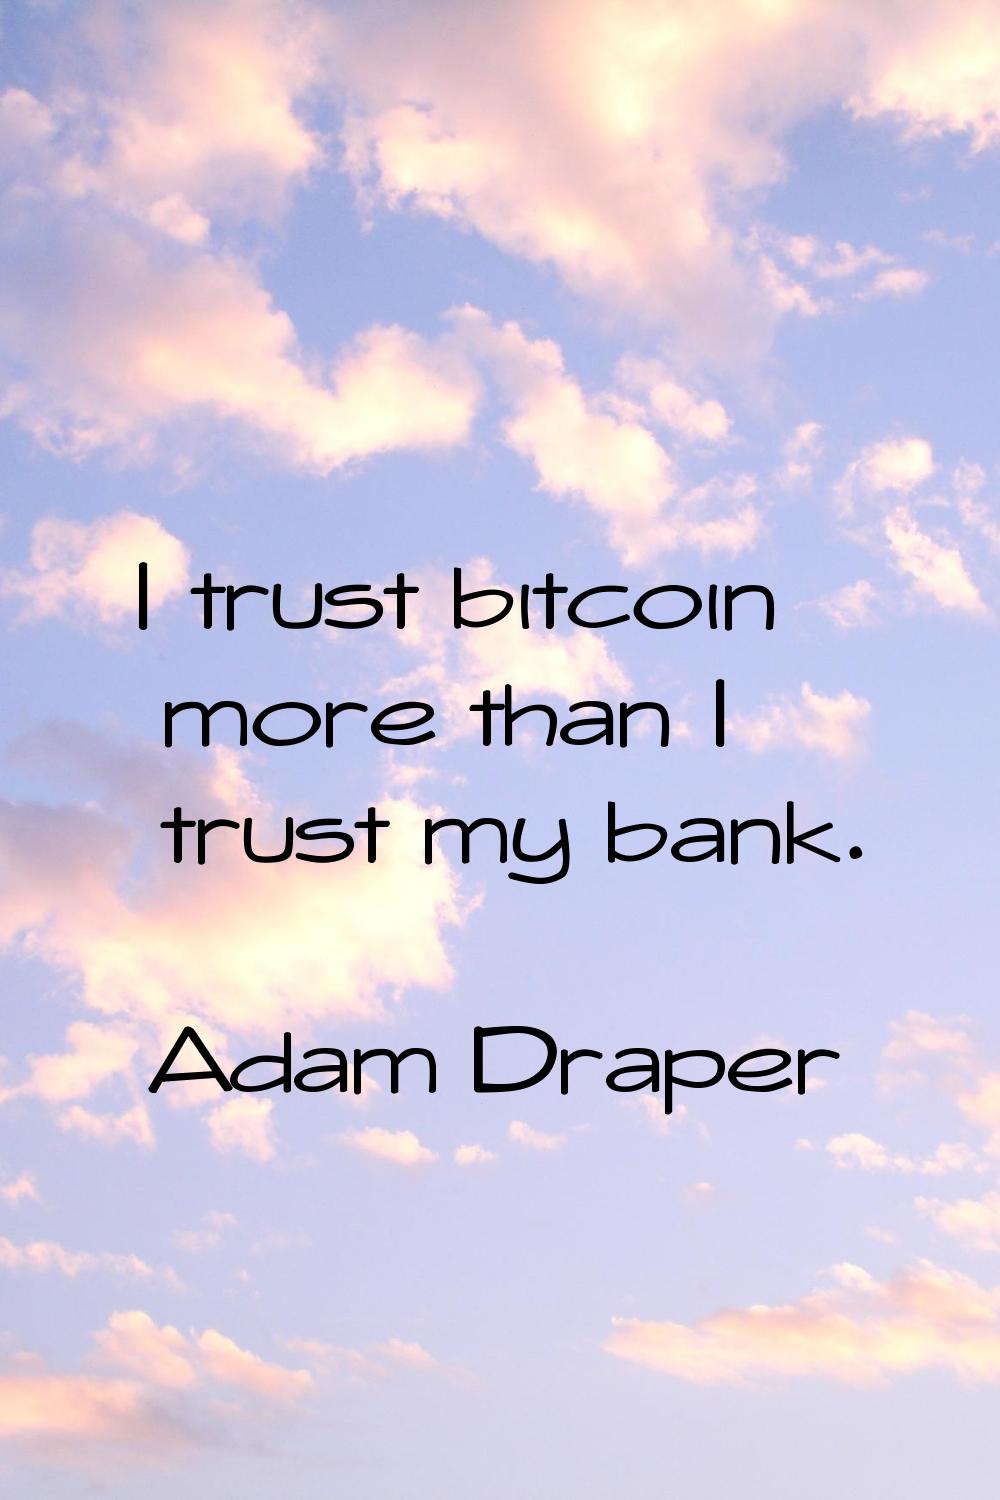 I trust bitcoin more than I trust my bank.